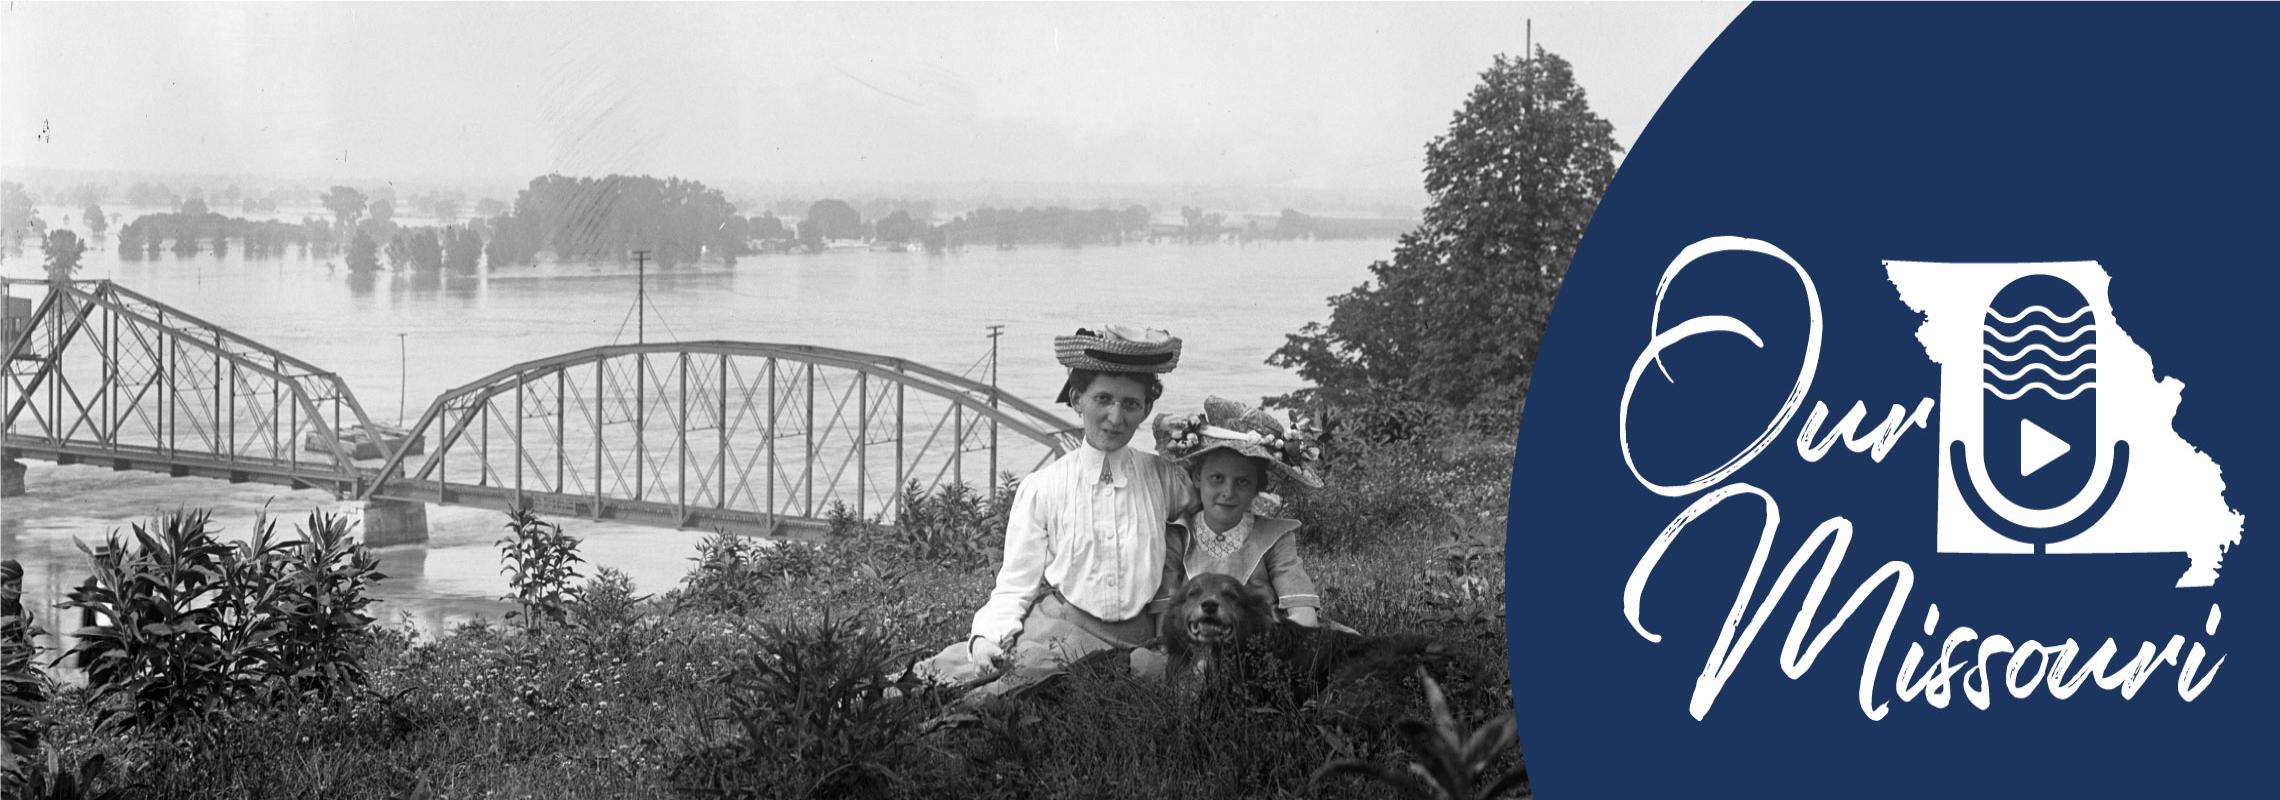 Louise and her daughter Doris seated on the grass by the Missouri River, ca. 1903, Boonville. [Maximilian E. Schmidt Photographs (P0001)]